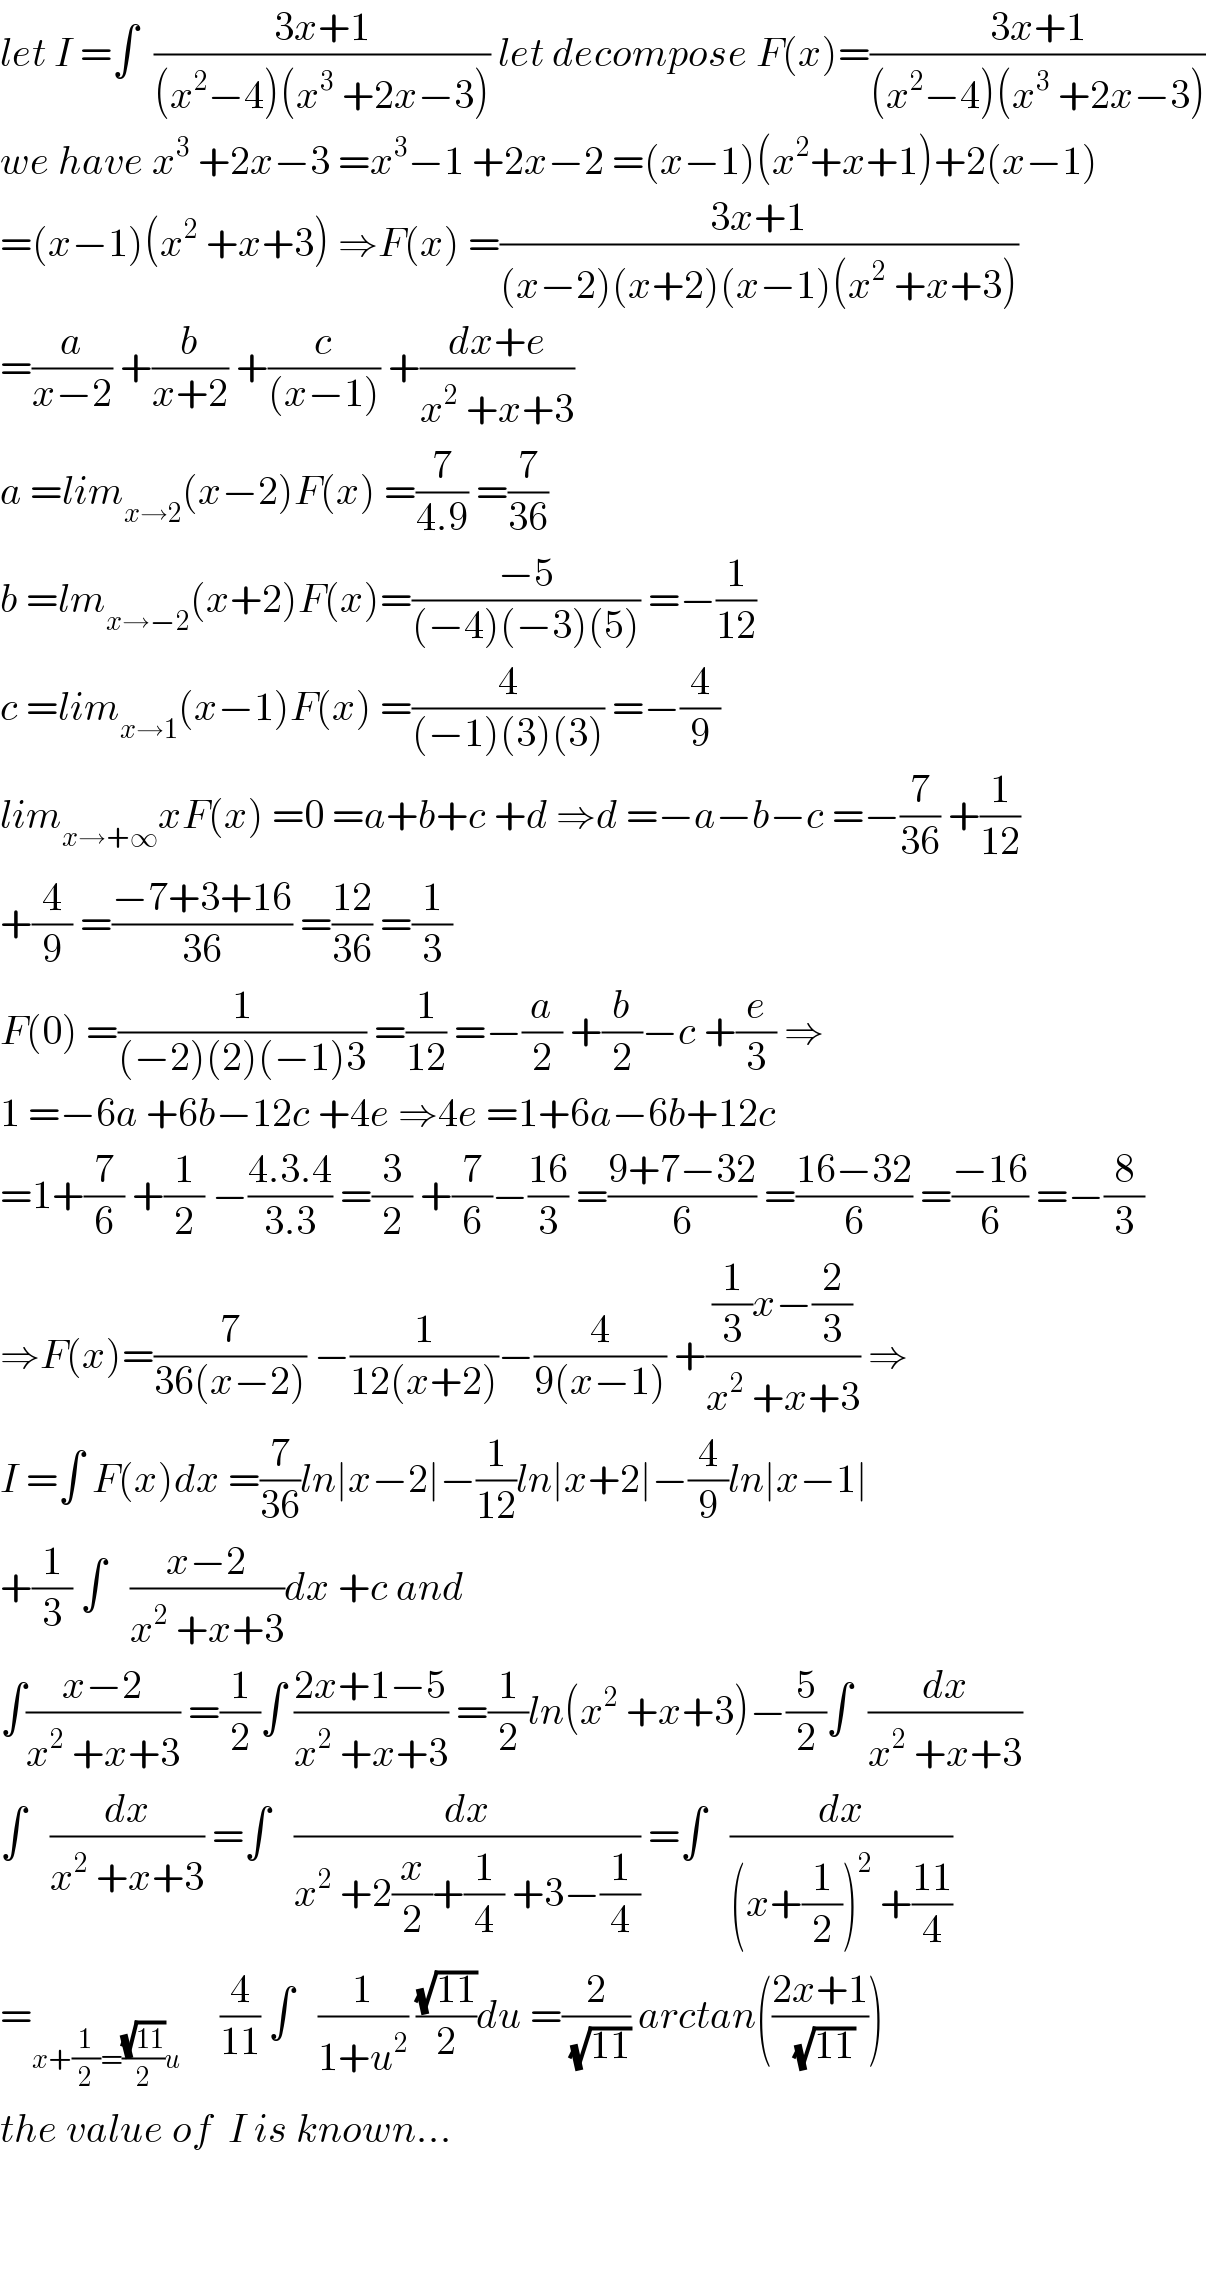 let I =∫  ((3x+1)/((x^2 −4)(x^3  +2x−3))) let decompose F(x)=((3x+1)/((x^2 −4)(x^3  +2x−3)))  we have x^3  +2x−3 =x^3 −1 +2x−2 =(x−1)(x^2 +x+1)+2(x−1)  =(x−1)(x^2  +x+3) ⇒F(x) =((3x+1)/((x−2)(x+2)(x−1)(x^2  +x+3)))  =(a/(x−2)) +(b/(x+2)) +(c/((x−1))) +((dx+e)/(x^2  +x+3))  a =lim_(x→2) (x−2)F(x) =(7/(4.9)) =(7/(36))  b =lm_(x→−2) (x+2)F(x)=((−5)/((−4)(−3)(5))) =−(1/(12))  c =lim_(x→1) (x−1)F(x) =(4/((−1)(3)(3))) =−(4/9)  lim_(x→+∞) xF(x) =0 =a+b+c +d ⇒d =−a−b−c =−(7/(36)) +(1/(12))  +(4/9) =((−7+3+16)/(36)) =((12)/(36)) =(1/3)  F(0) =(1/((−2)(2)(−1)3)) =(1/(12)) =−(a/2) +(b/2)−c +(e/3) ⇒  1 =−6a +6b−12c +4e ⇒4e =1+6a−6b+12c  =1+(7/6) +(1/2) −((4.3.4)/(3.3)) =(3/2) +(7/6)−((16)/3) =((9+7−32)/6) =((16−32)/6) =((−16)/6) =−(8/3)  ⇒F(x)=(7/(36(x−2))) −(1/(12(x+2)))−(4/(9(x−1))) +(((1/3)x−(2/3))/(x^2  +x+3)) ⇒  I =∫ F(x)dx =(7/(36))ln∣x−2∣−(1/(12))ln∣x+2∣−(4/9)ln∣x−1∣  +(1/3) ∫   ((x−2)/(x^2  +x+3))dx +c and  ∫((x−2)/(x^2  +x+3)) =(1/2)∫ ((2x+1−5)/(x^2  +x+3)) =(1/2)ln(x^2  +x+3)−(5/2)∫  (dx/(x^2  +x+3))  ∫   (dx/(x^2  +x+3)) =∫   (dx/(x^2  +2(x/2)+(1/4) +3−(1/4))) =∫   (dx/((x+(1/2))^2  +((11)/4)))  =_(x+(1/2)=((√(11))/2)u)      (4/(11)) ∫   (1/(1+u^2 )) ((√(11))/2)du =(2/( (√(11)))) arctan(((2x+1)/( (√(11)))))  the value of  I is known...      